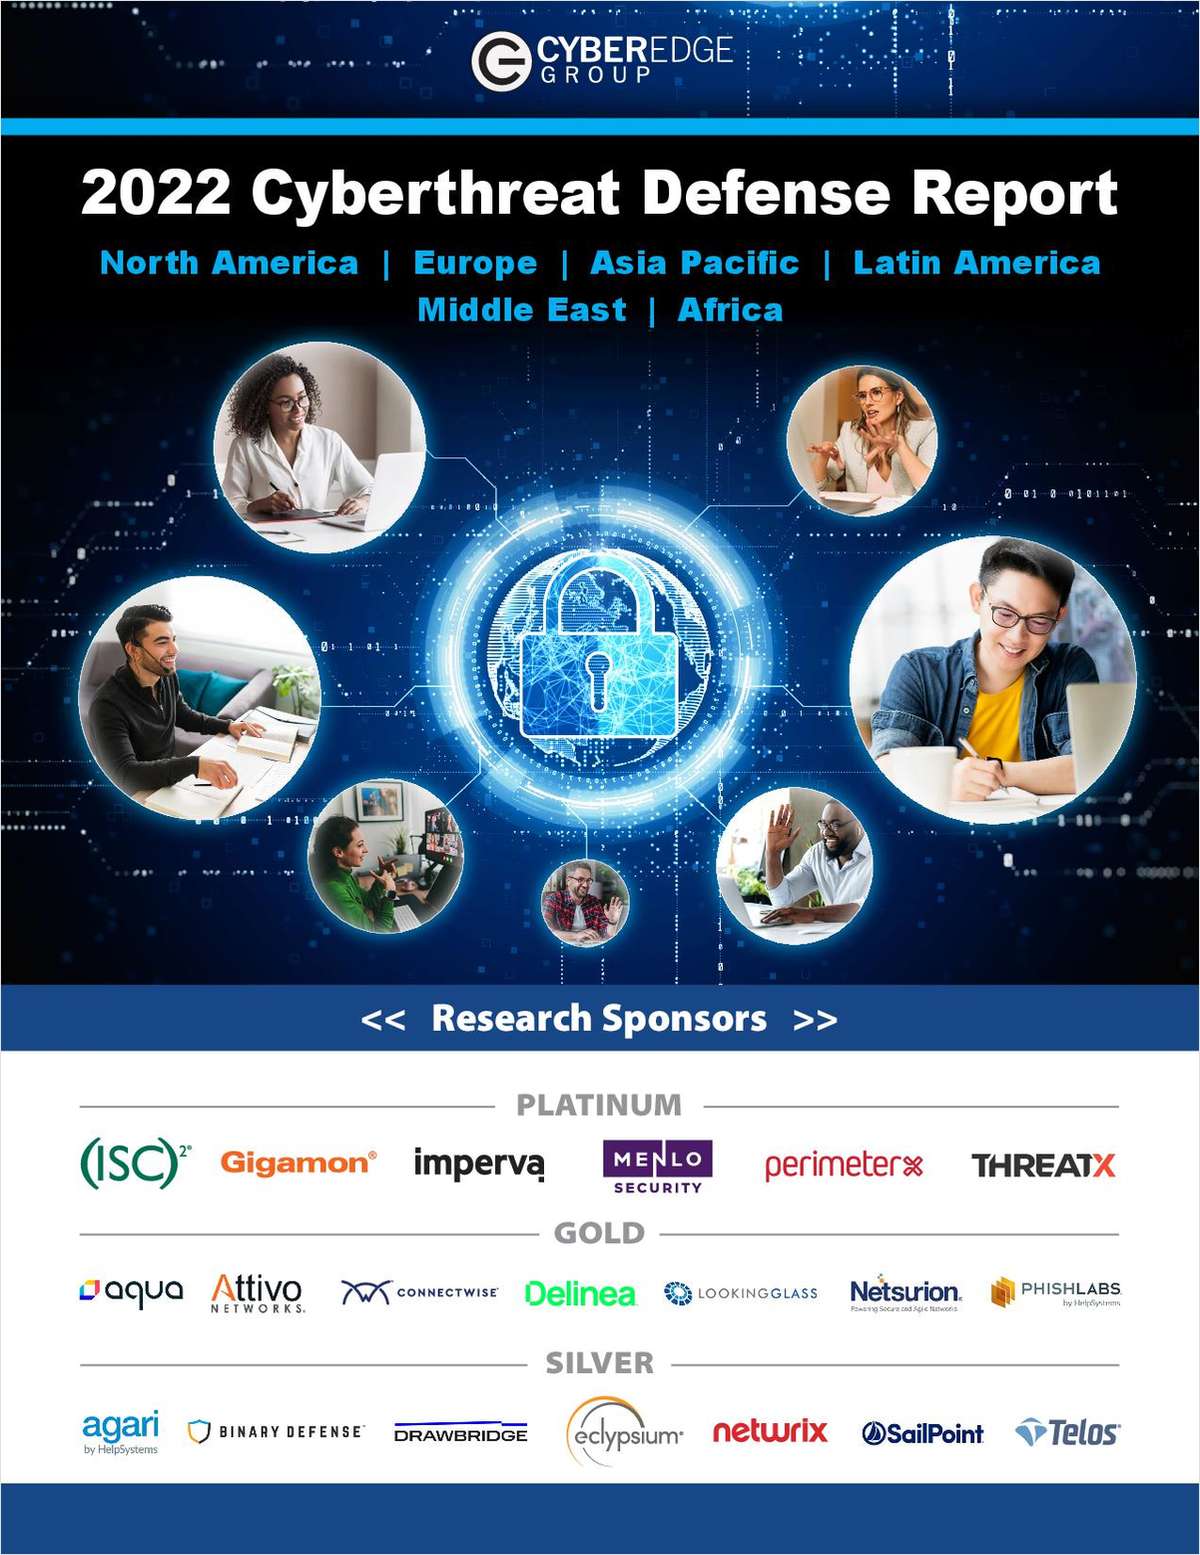 2022 Cyberthreat Defense Report - Sponsored by (ISC)²